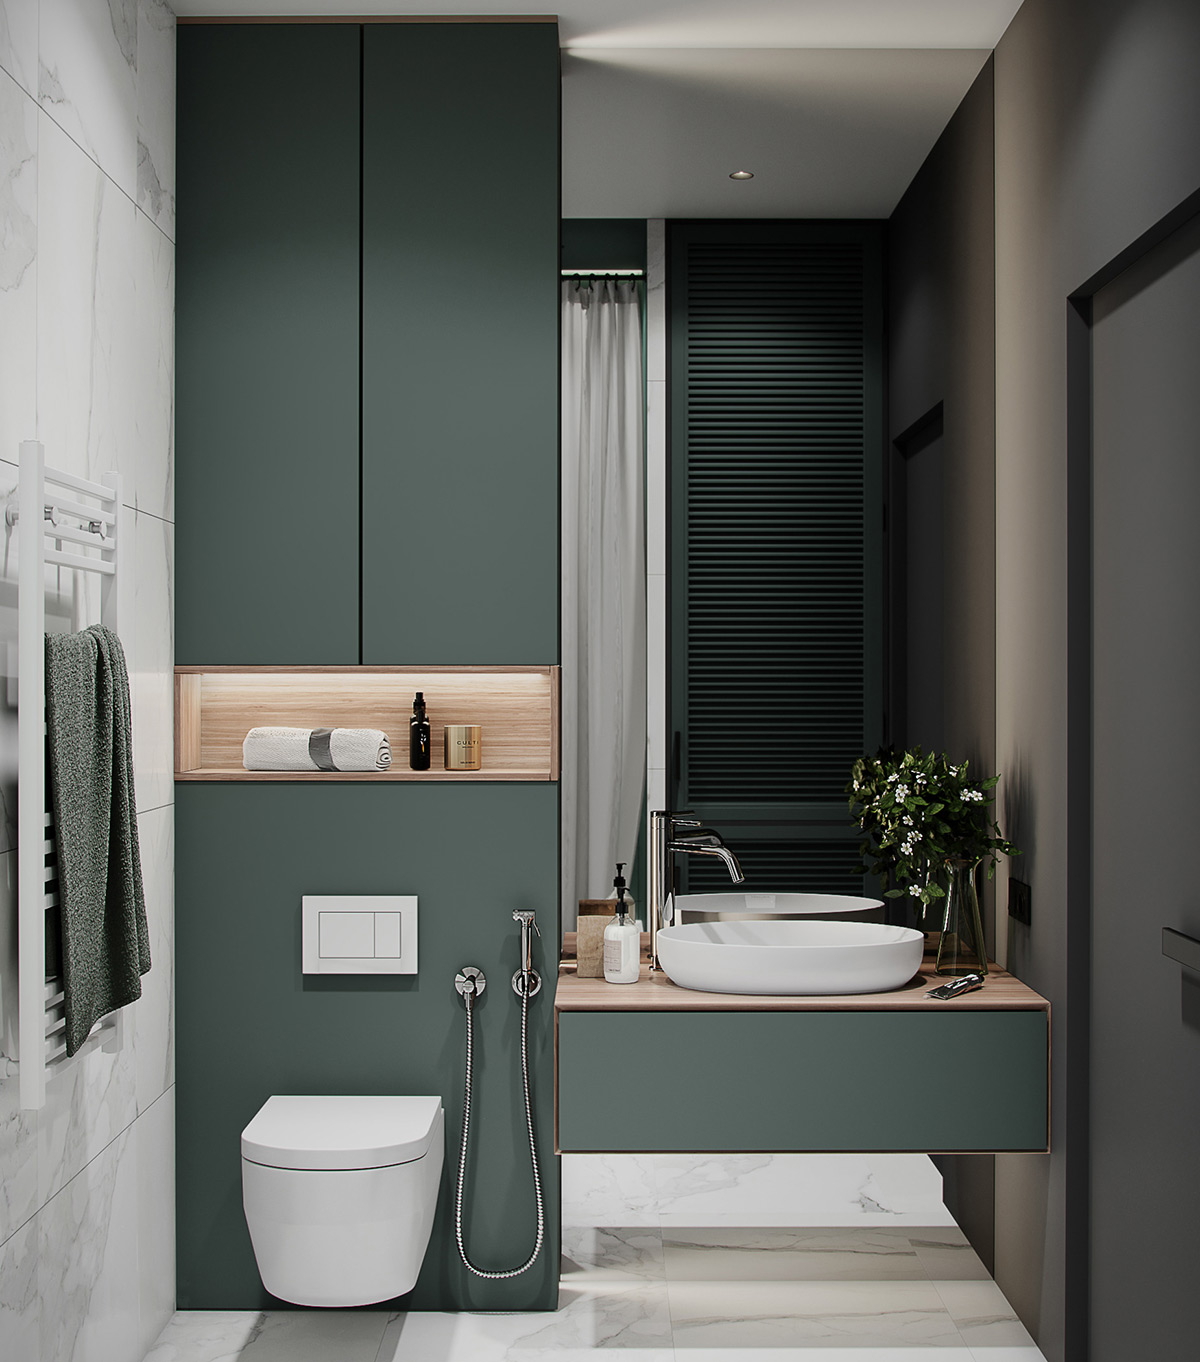 To enrich the aesthetic, install natural wood shelf inserts into a green cistern concealment wall and wooden countertops onto a green vanity unit.